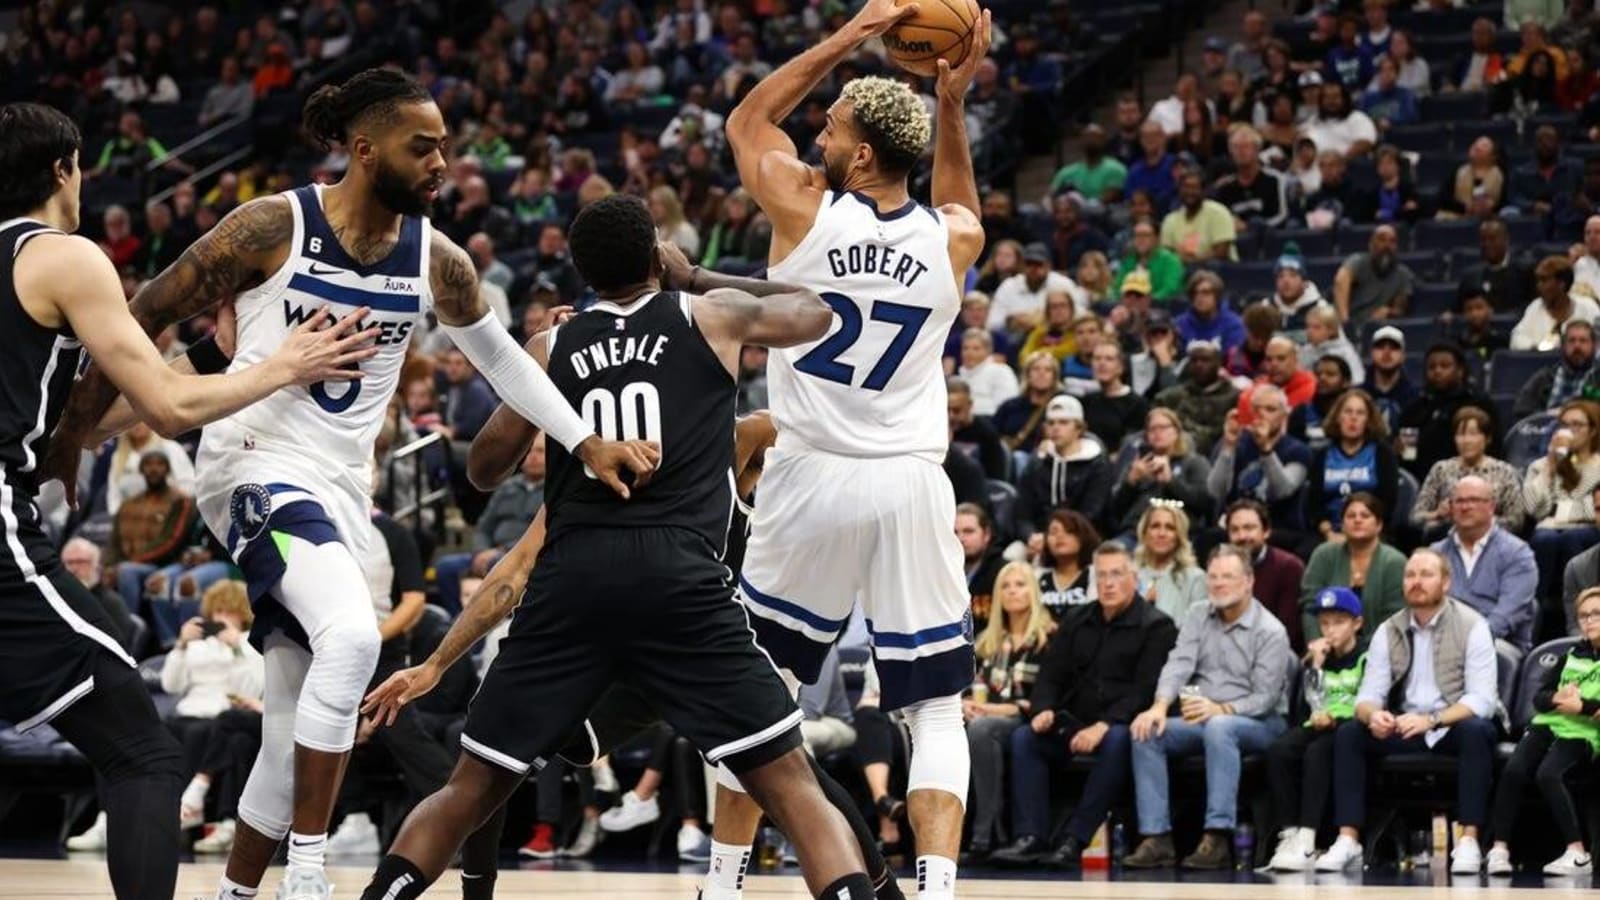 Rudy Gobert faces off against former team as Jazz visit Timberwolves